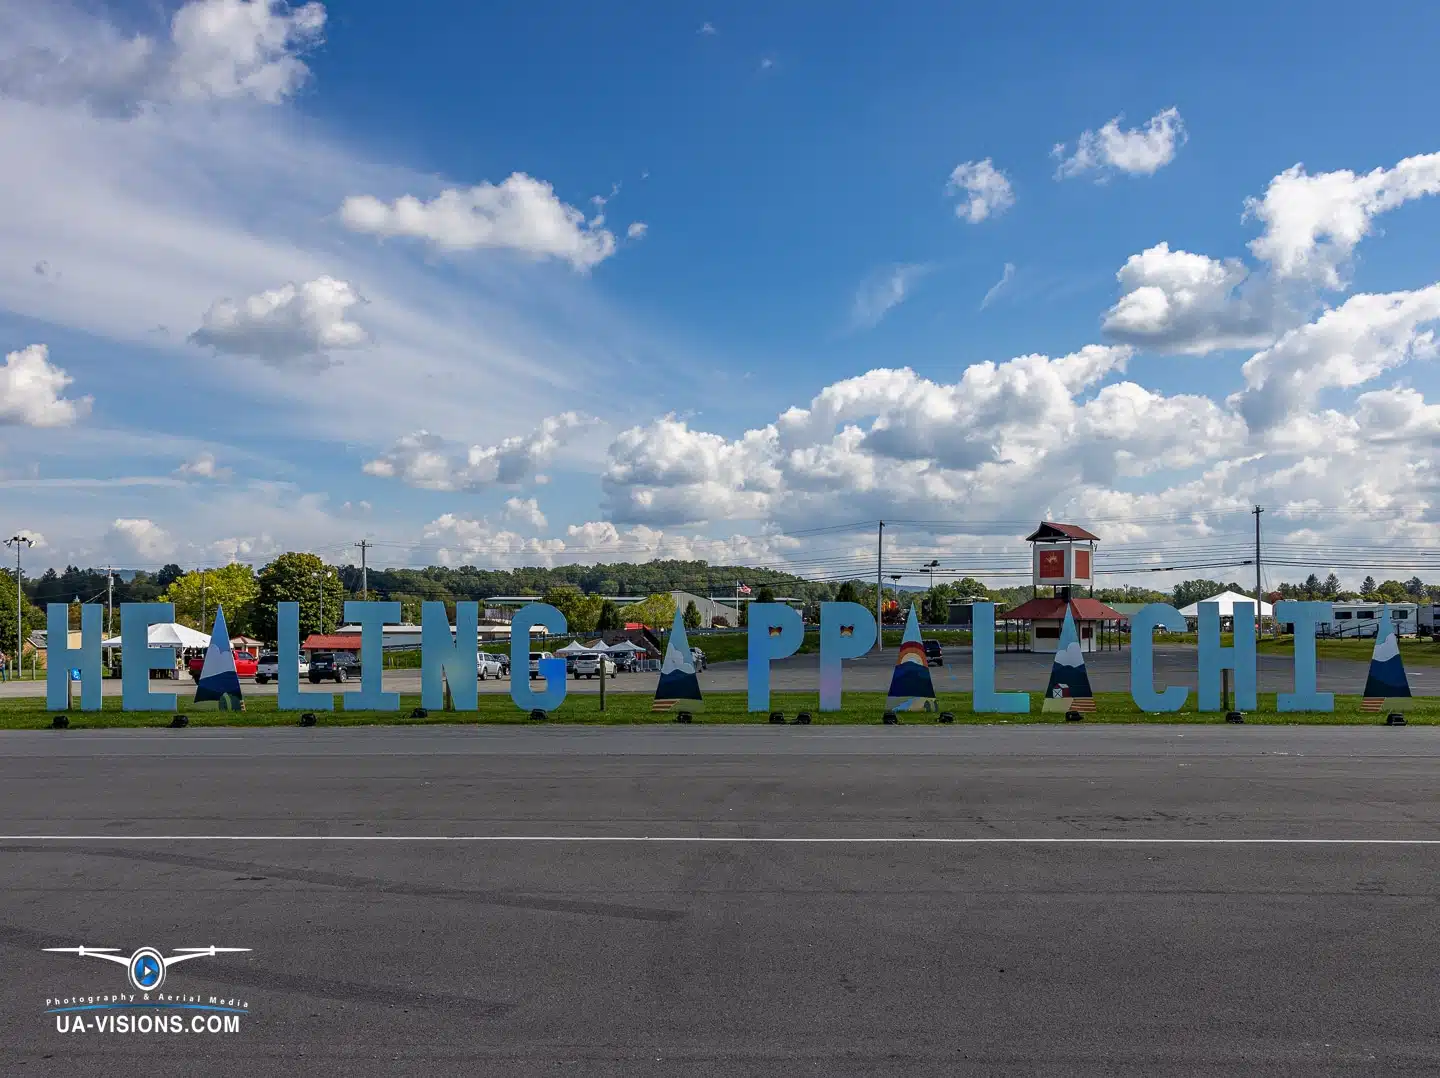 The 'Healing Appalachia' sign stands bold and bright against a blue sky in Lewisburg, WV.